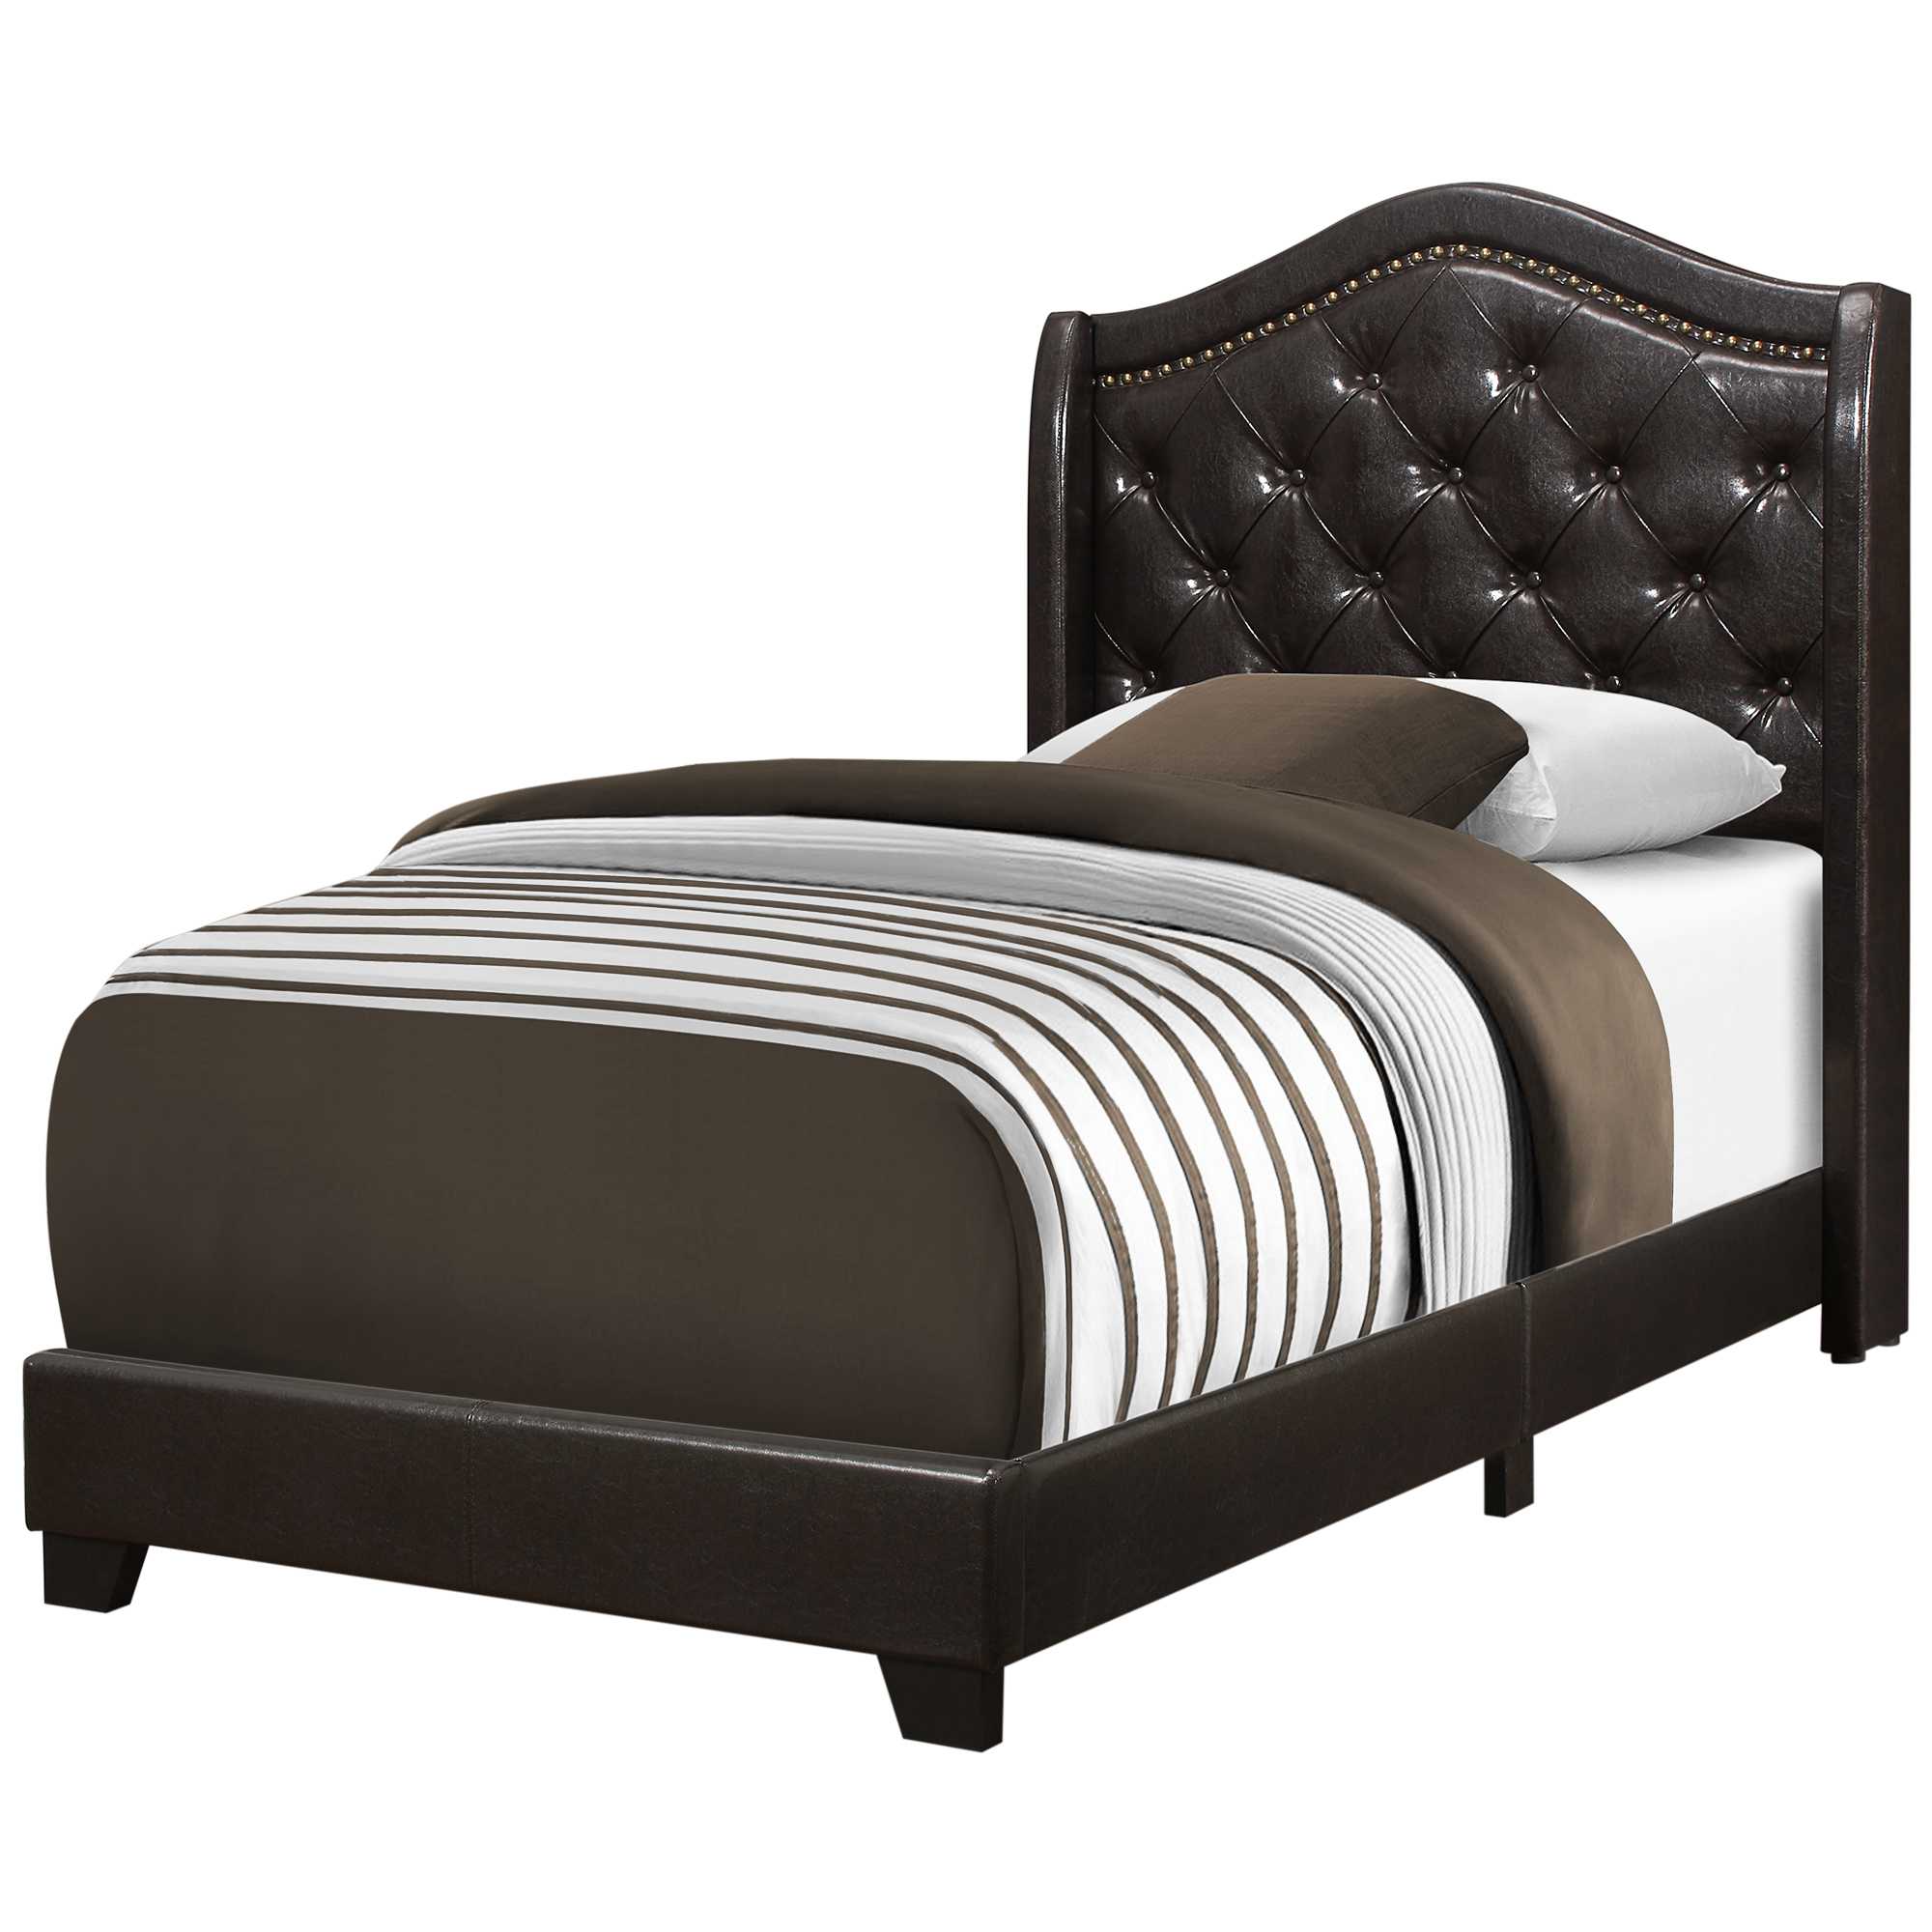 45.75" x 82.75" x 56.5" Brown Foam Solid Wood Leather Look Linen Twin Size Bed With A Brass Trim